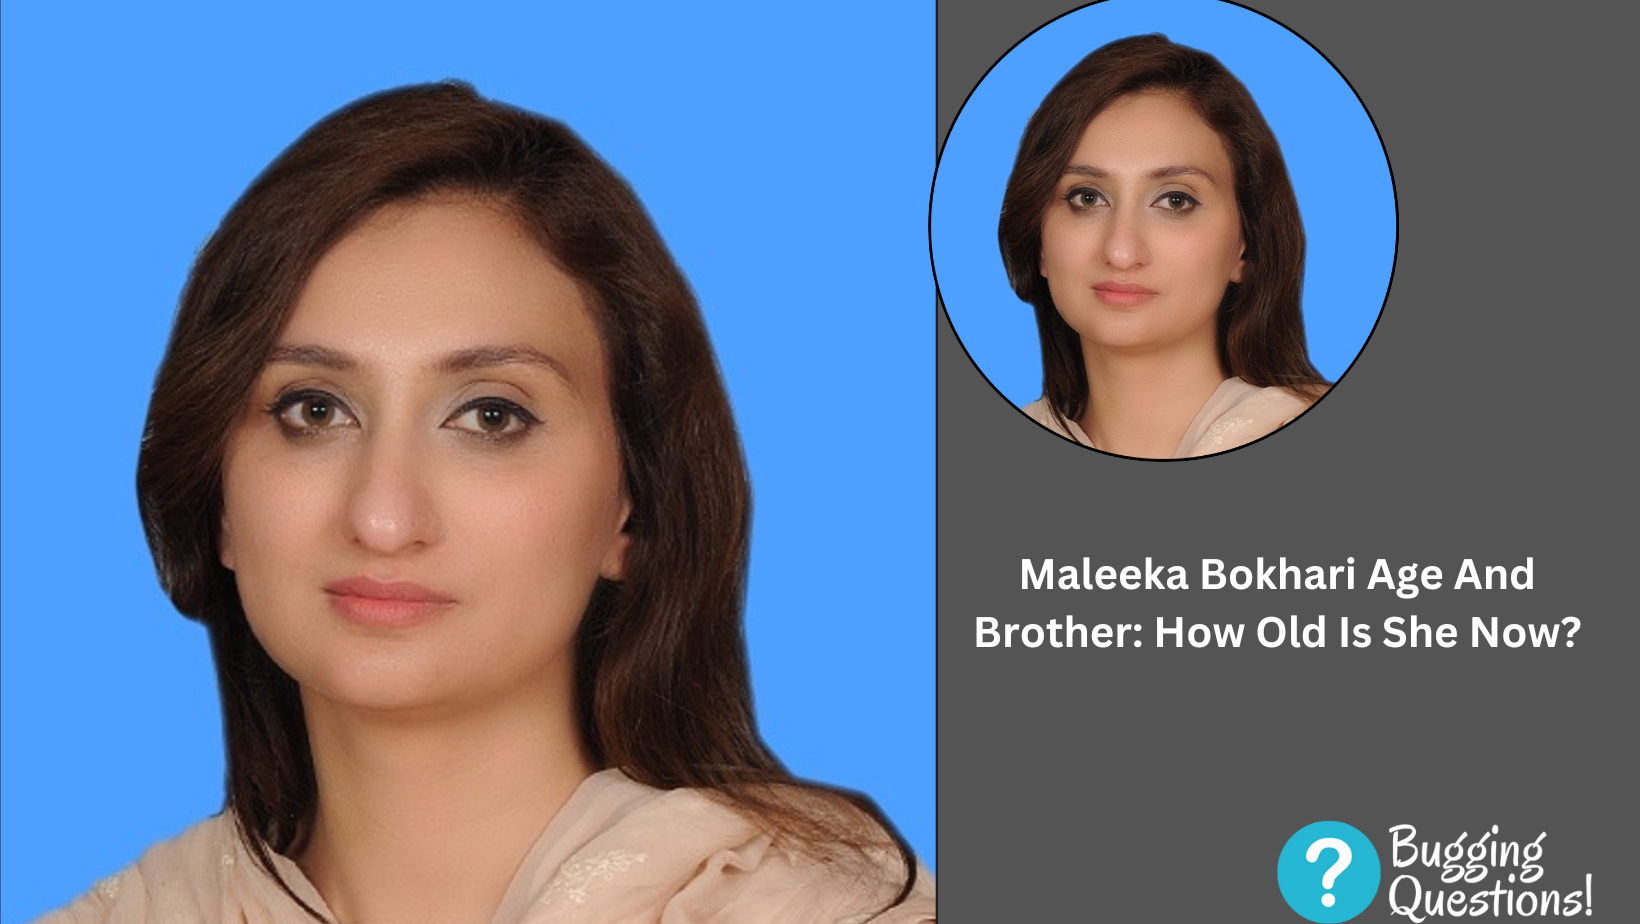 Maleeka Bokhari Age And Brother: How Old Is She Now?